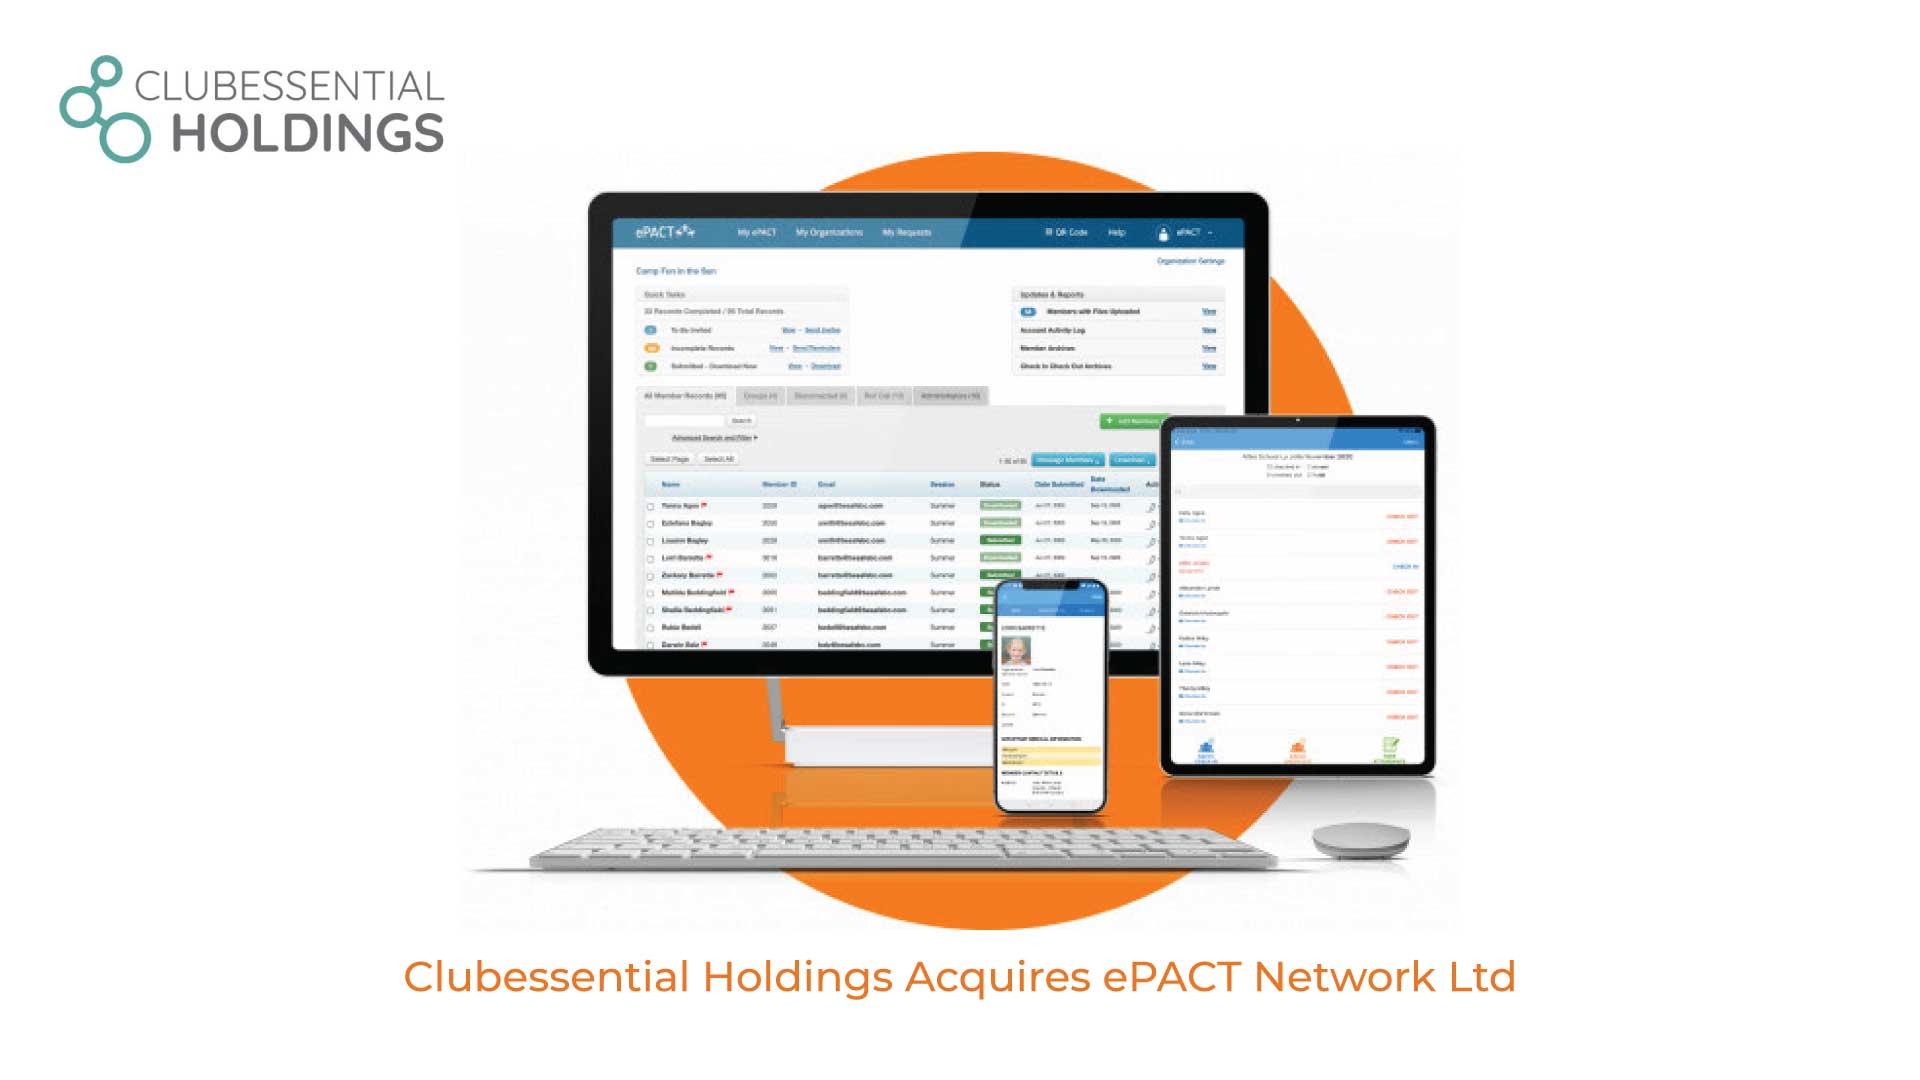 Clubessential Holdings Announces Acquisition of ePACT Network Ltd.